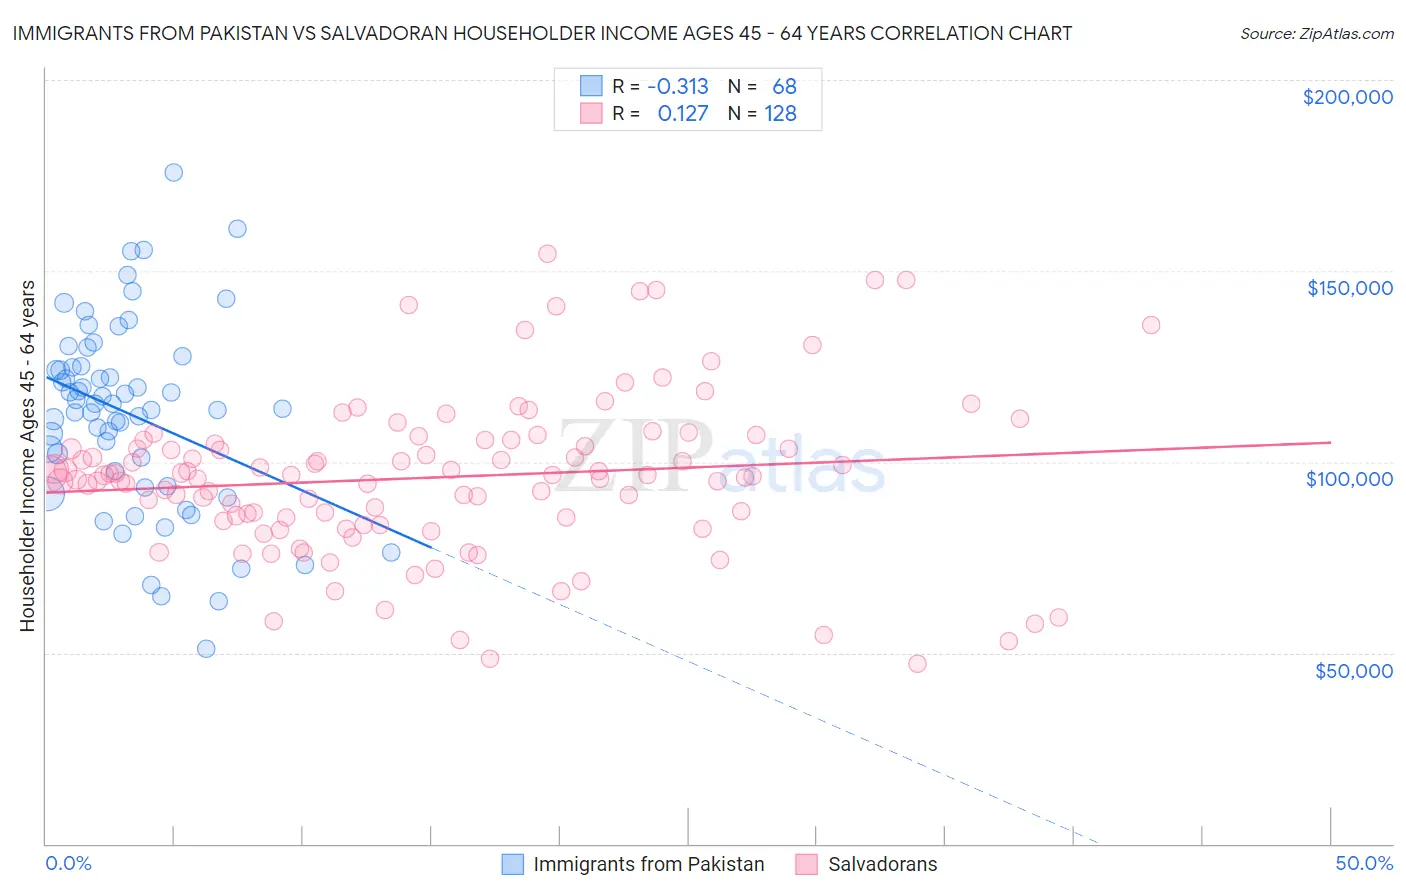 Immigrants from Pakistan vs Salvadoran Householder Income Ages 45 - 64 years